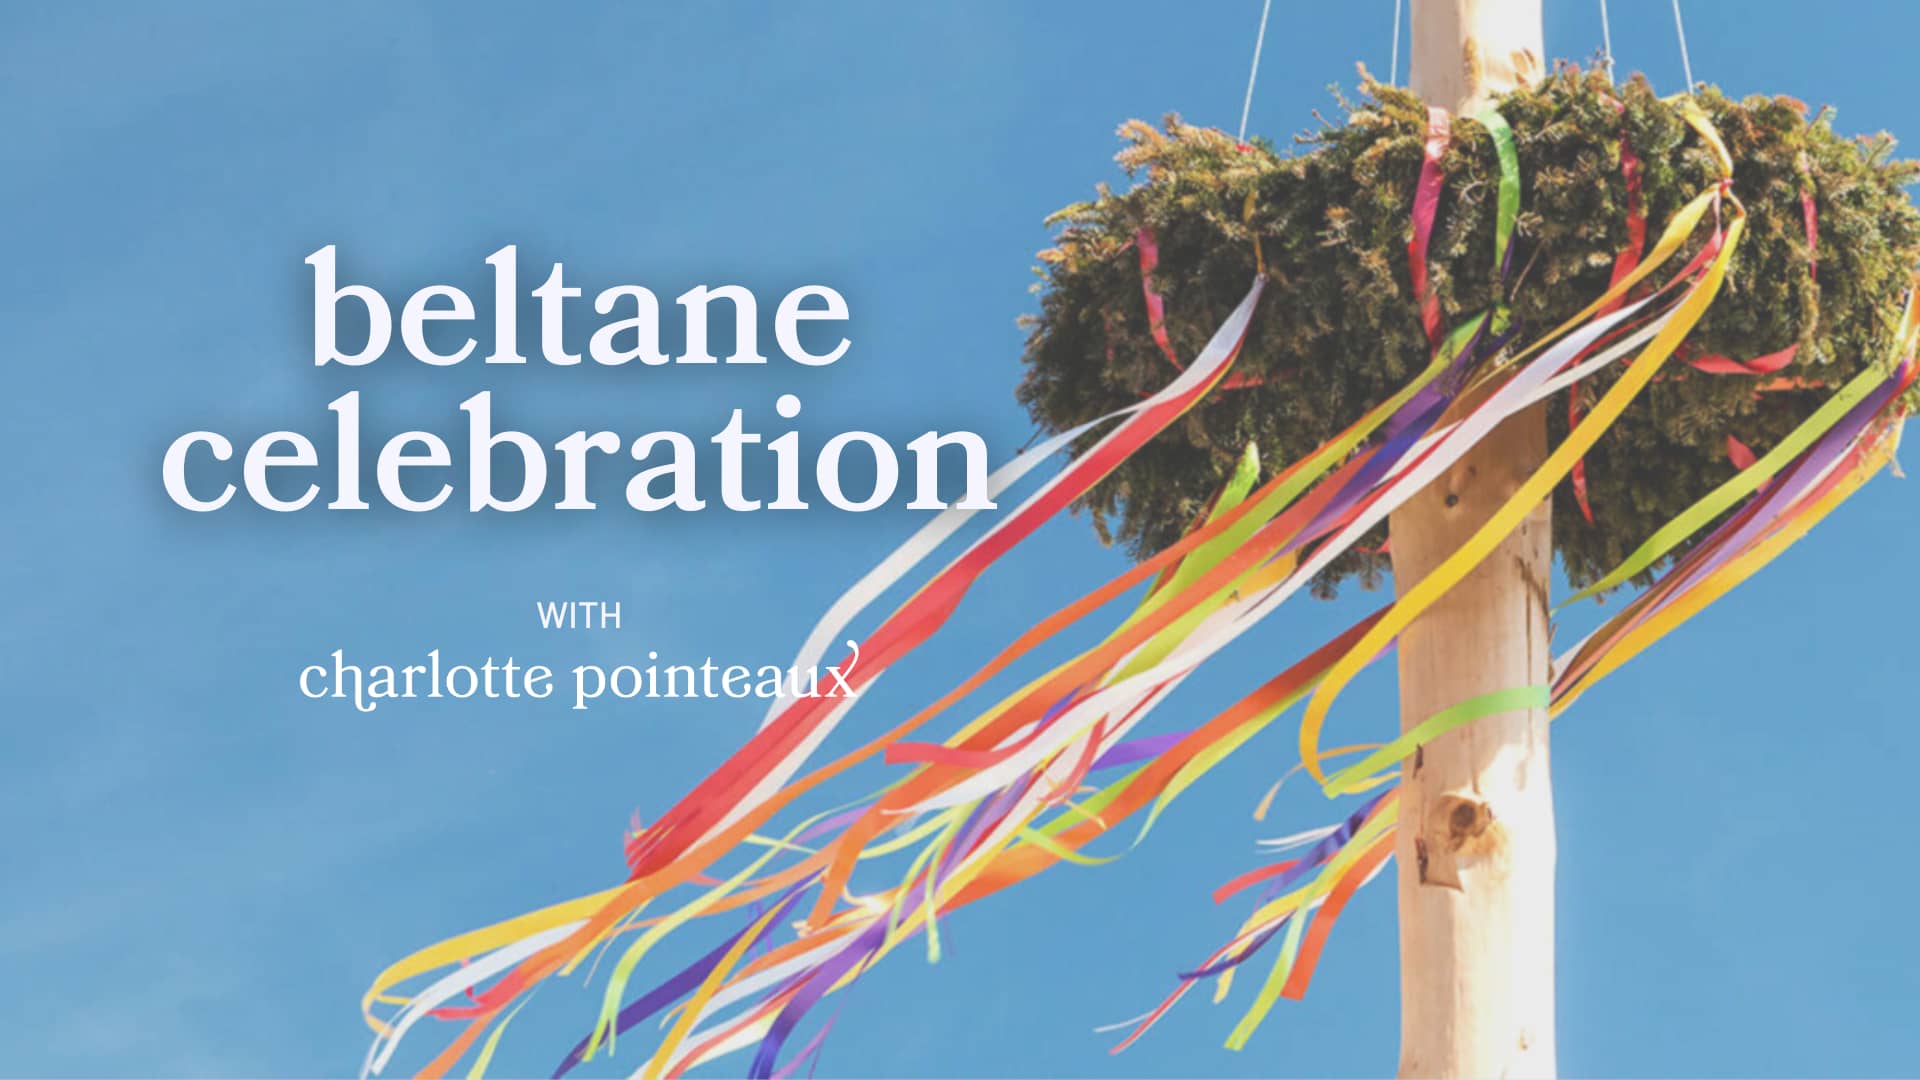 Beltane women's circle ceremony with Charlotte Pointeaux